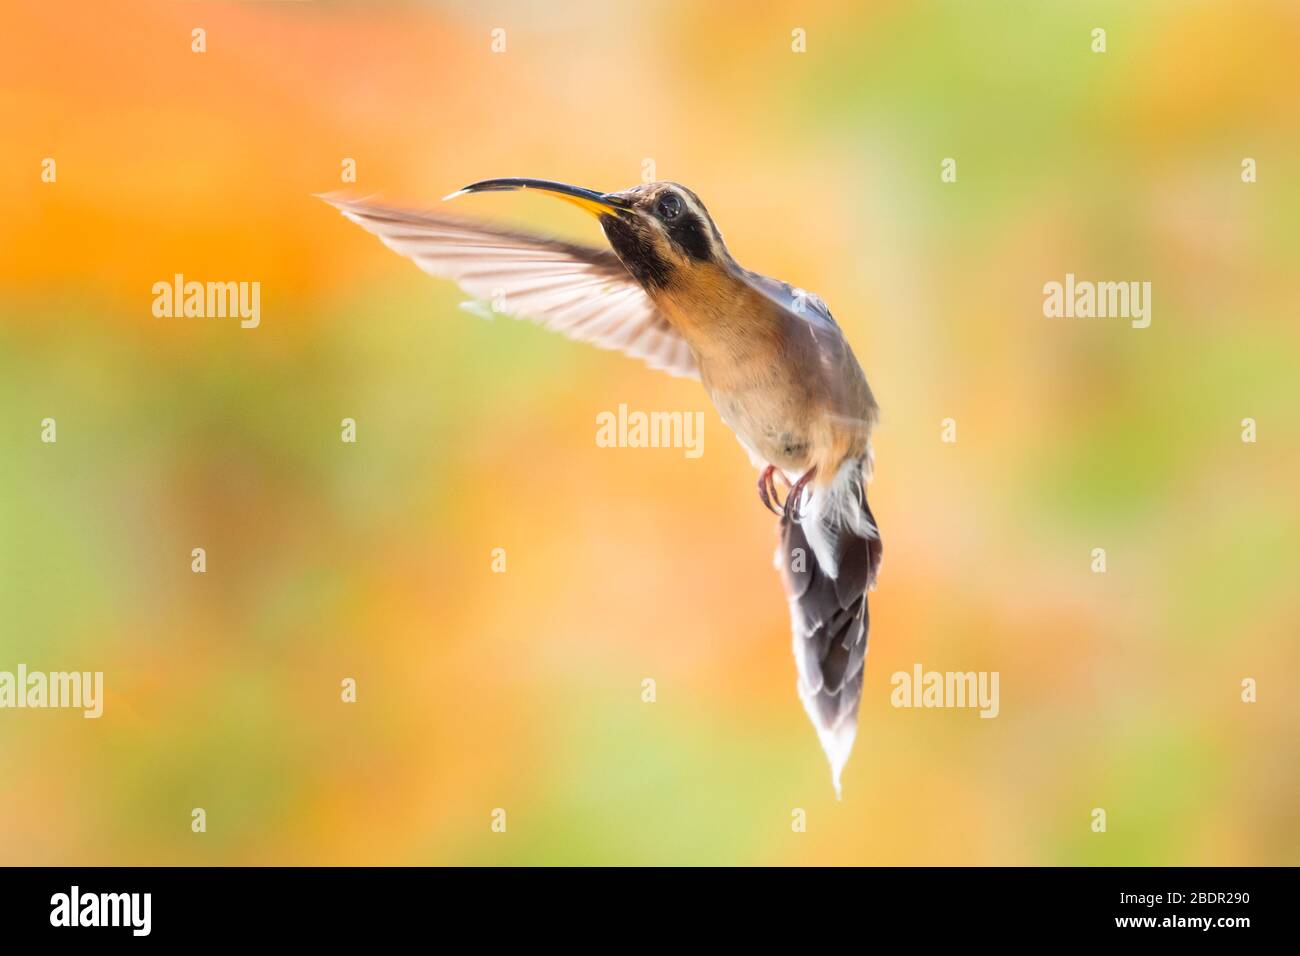 A Little Hermit hummingbird hovering on a bright sunlit day with orange blurred flowers in the background. Stock Photo